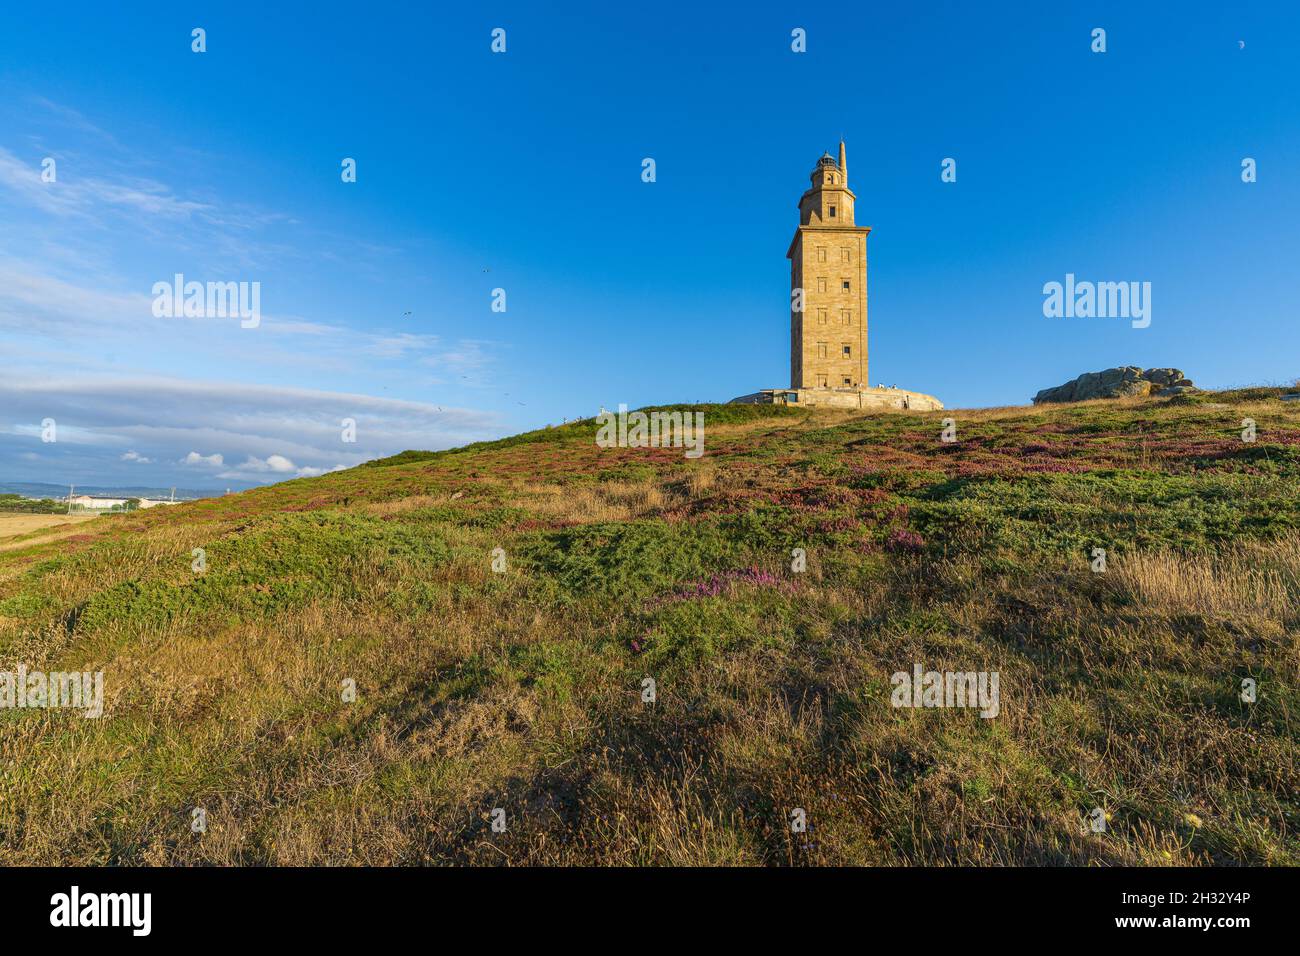 View of the Tower of Hercules in the Galician city of A Coruna in Spain.  Stock Photo